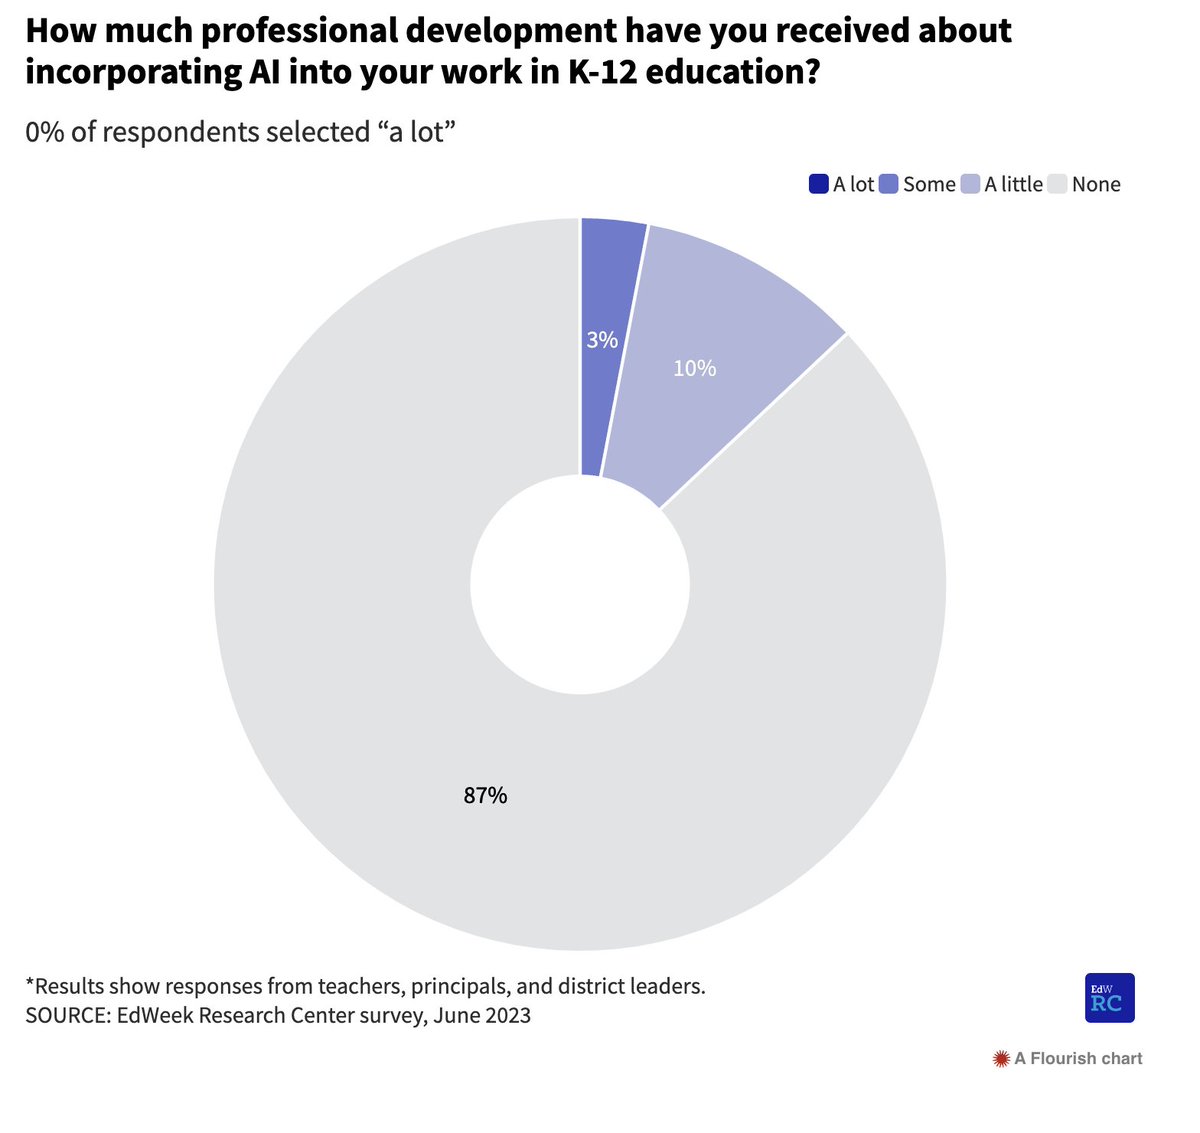 New June survey from @educationweek: More than 4 in 10 in education believe teaching AI is a top priority or very important. Yet almost 9 in 10 have never had any professional development in AI! We gotta #TeachAI - both how to use it and how it works. edweek.org/technology/wha…